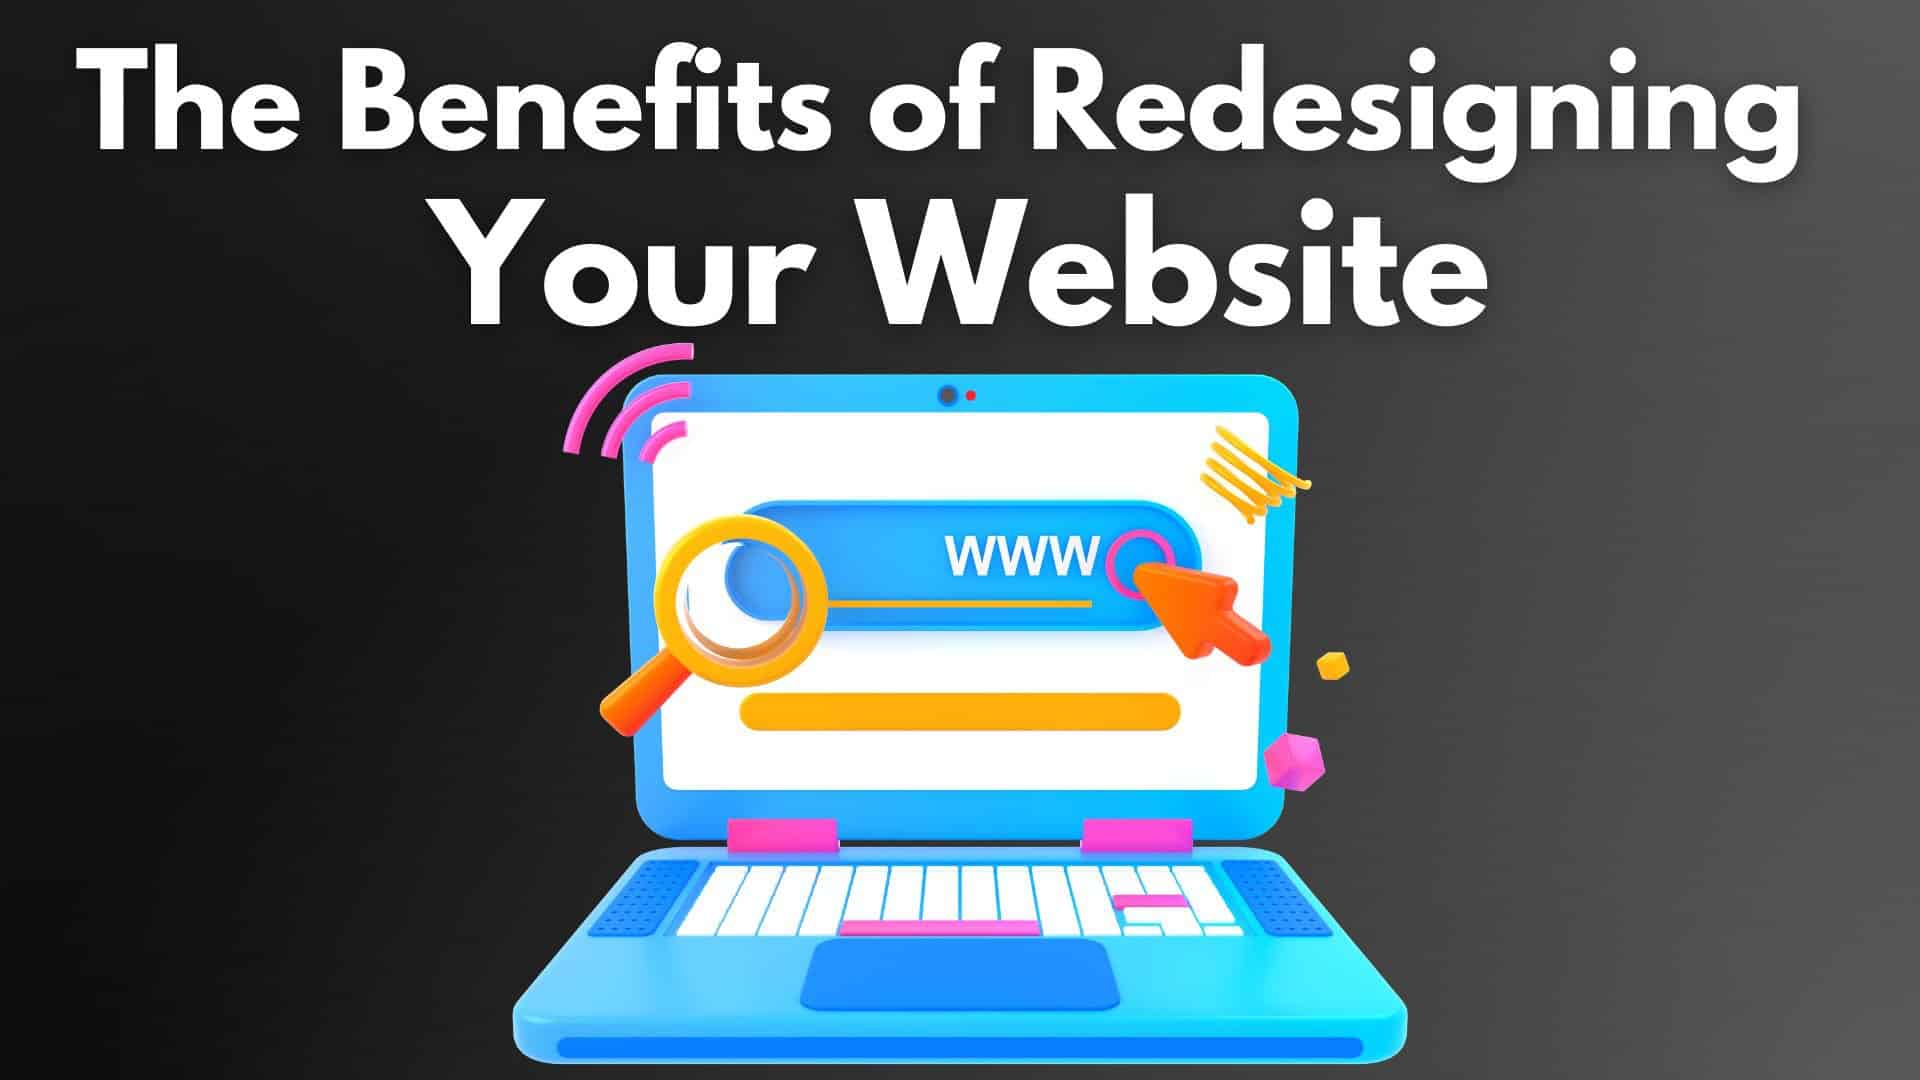 The Benefits of Redesigning Your Website